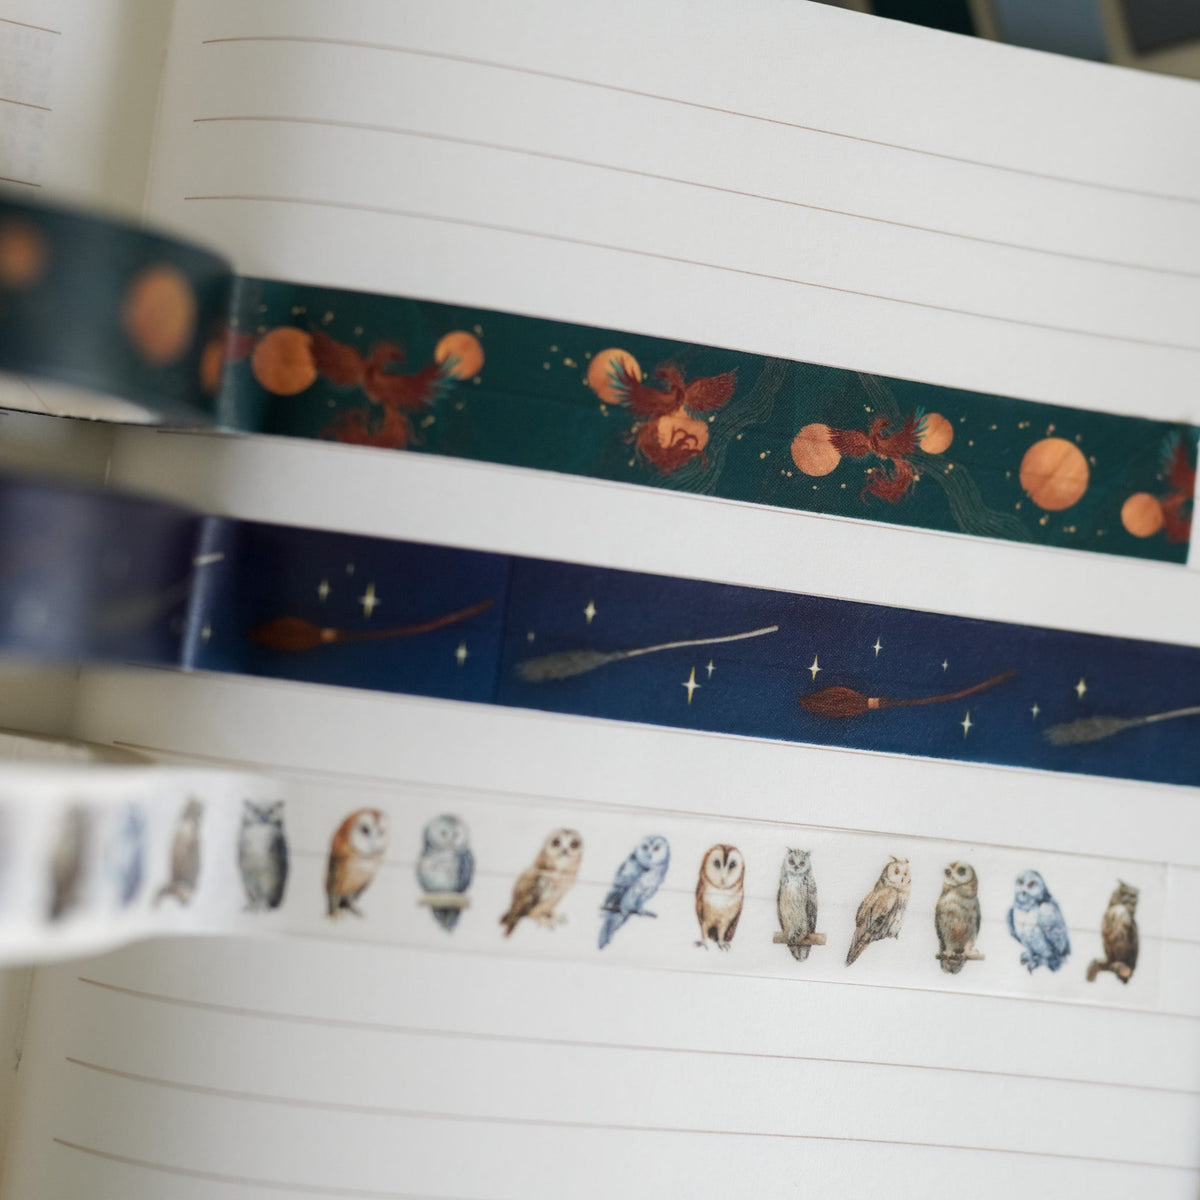 Enchanting Washi Tape has 3 patterns: dark green with orange phoenixes, navy blue with brooms, and white with owls